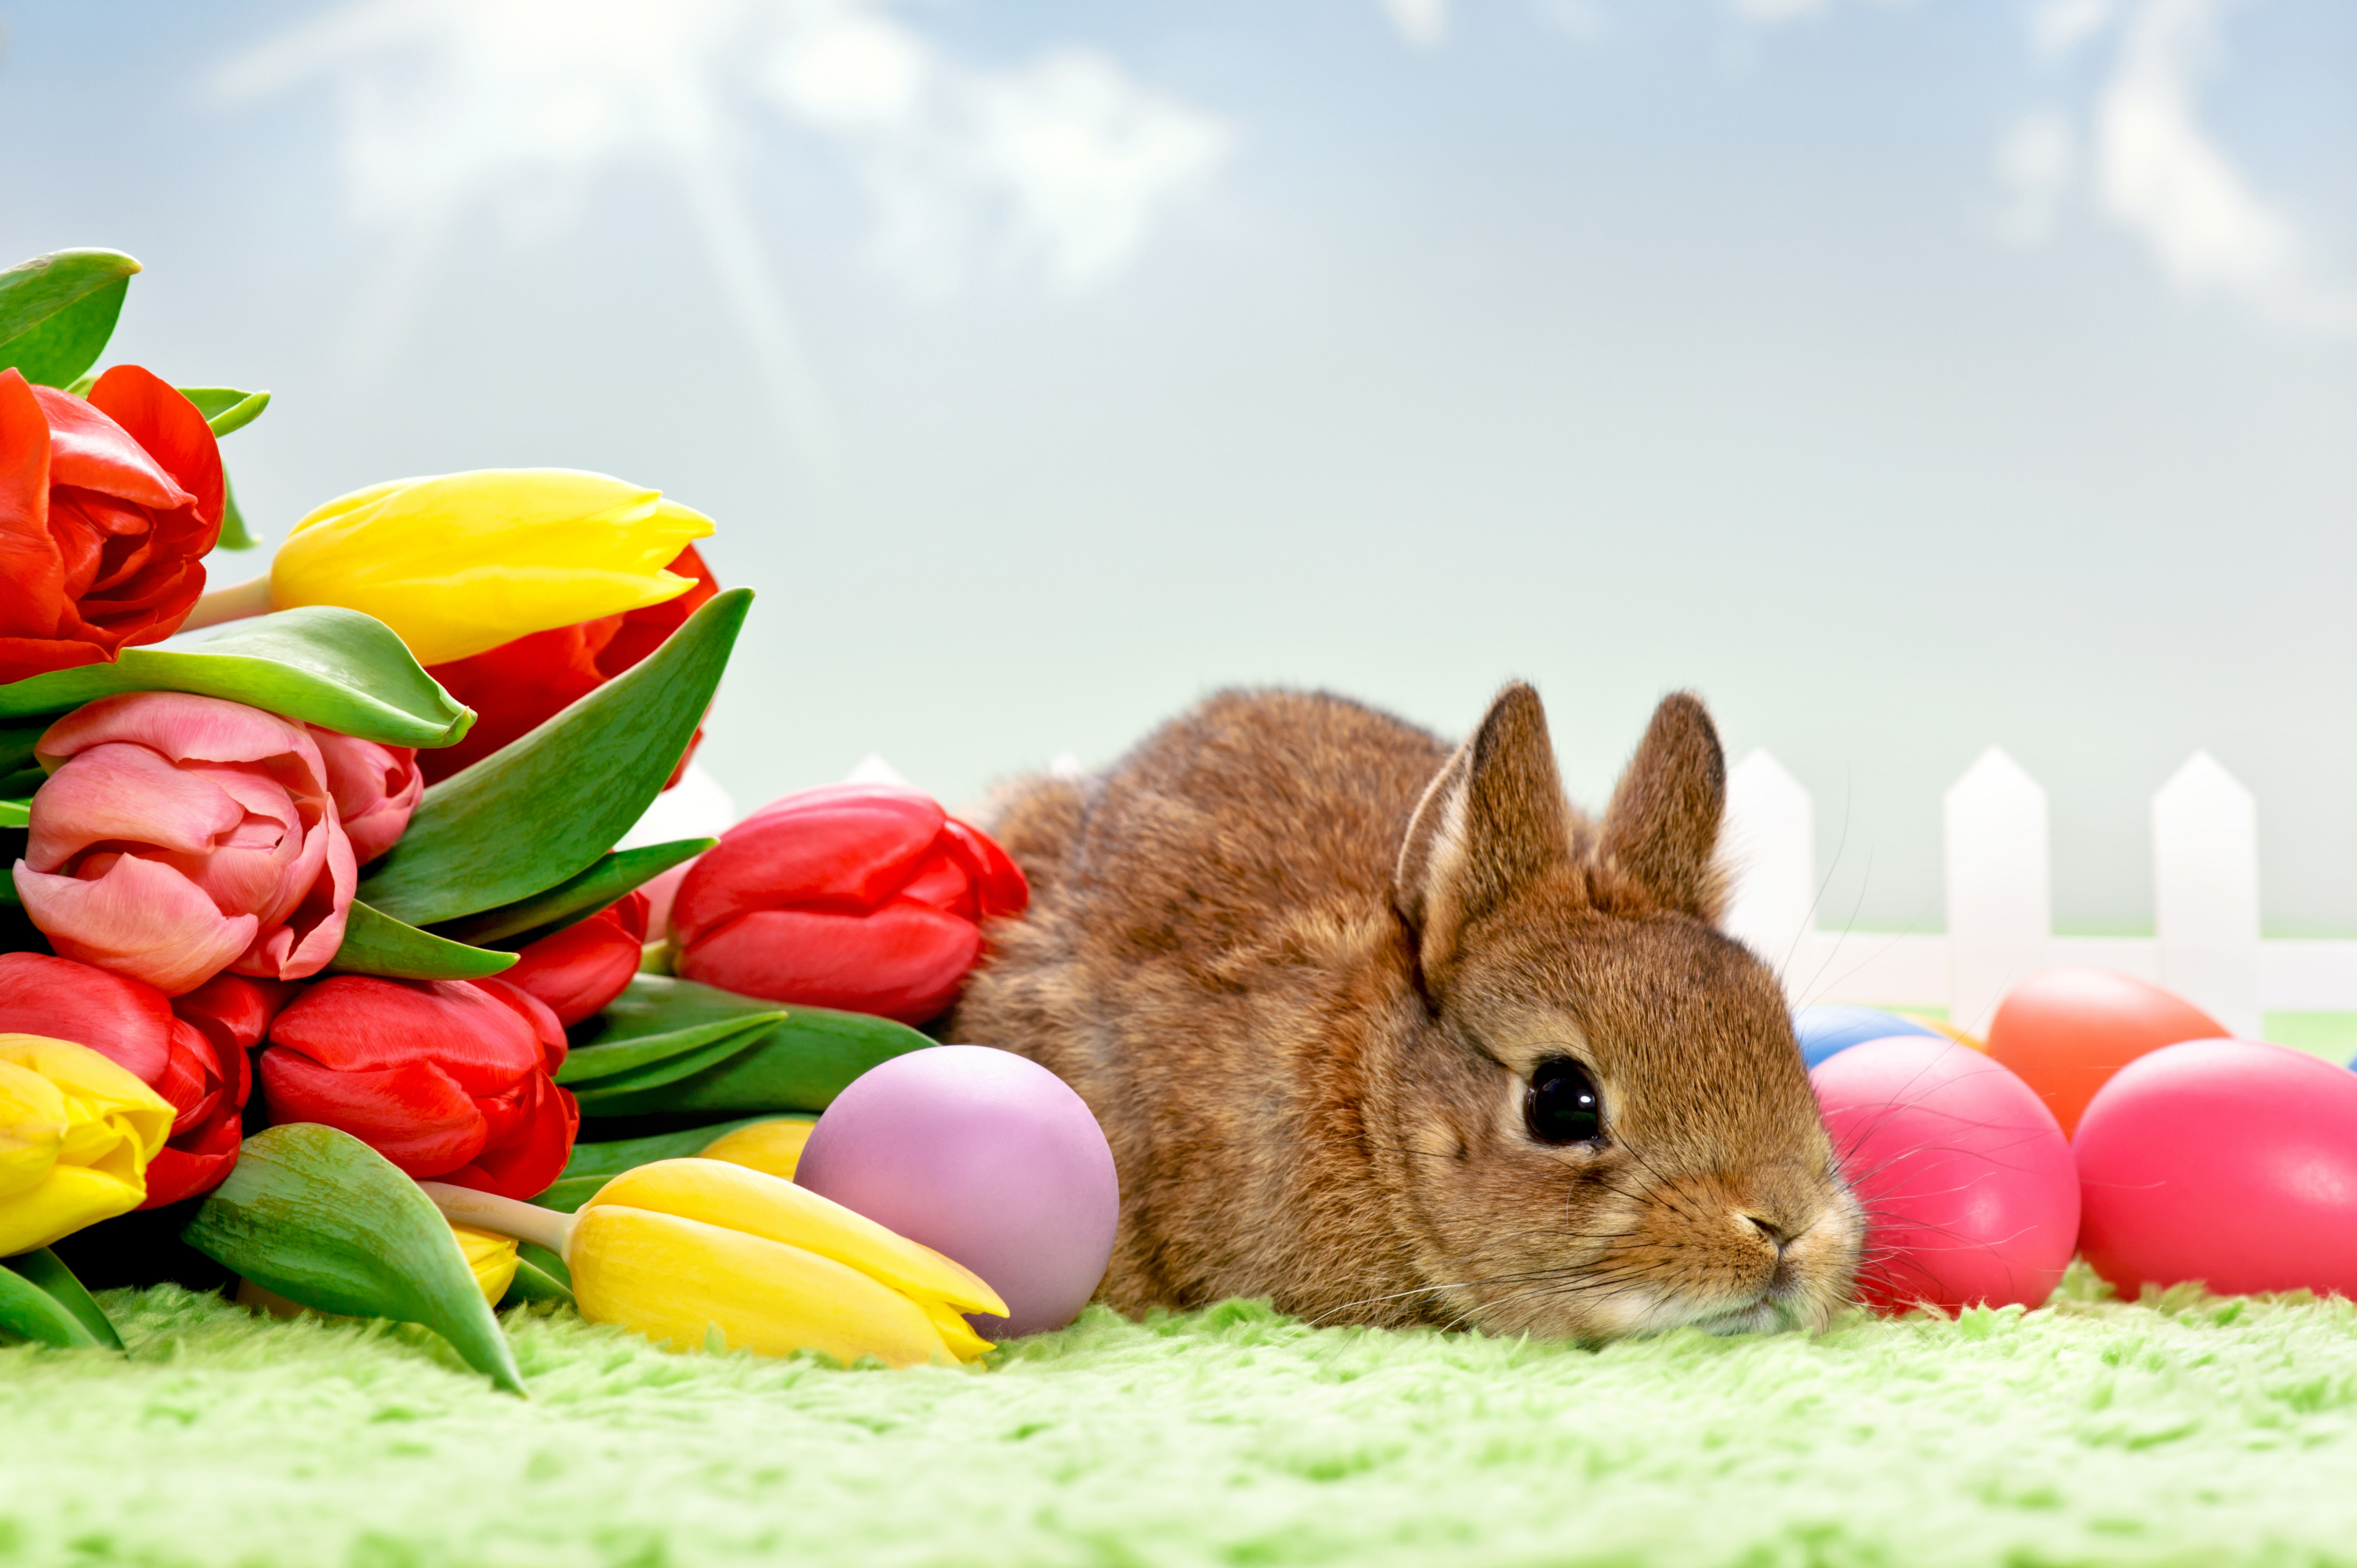 Tulips And Easter Bunny Wallpaper Image Pictures